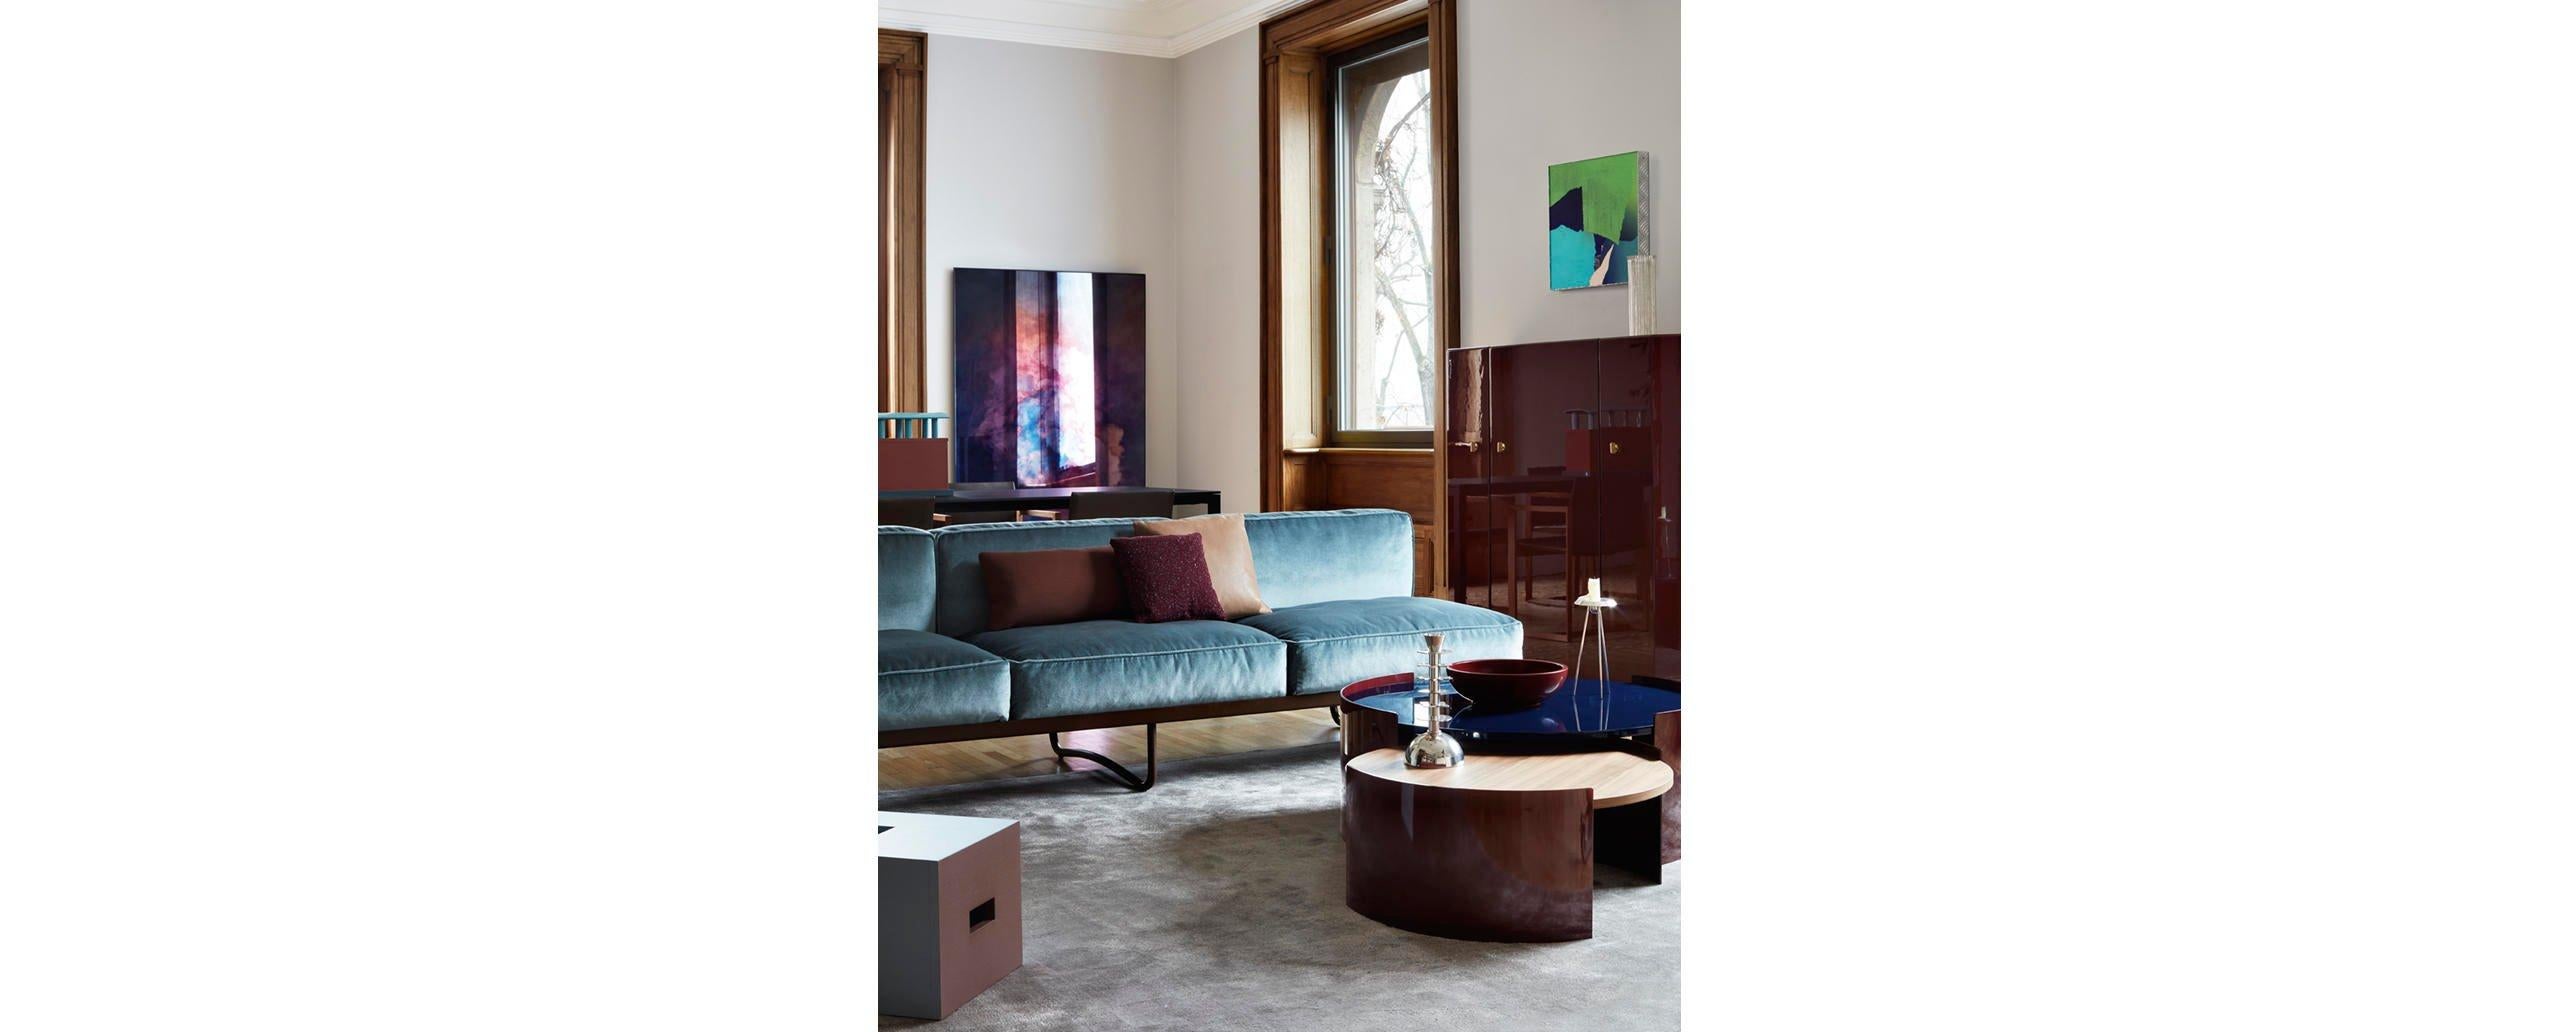 Contemporary Le Corbusier, Pierre Jeanneret, Charlotte Perriand LC5 Sofa by Cassina For Sale